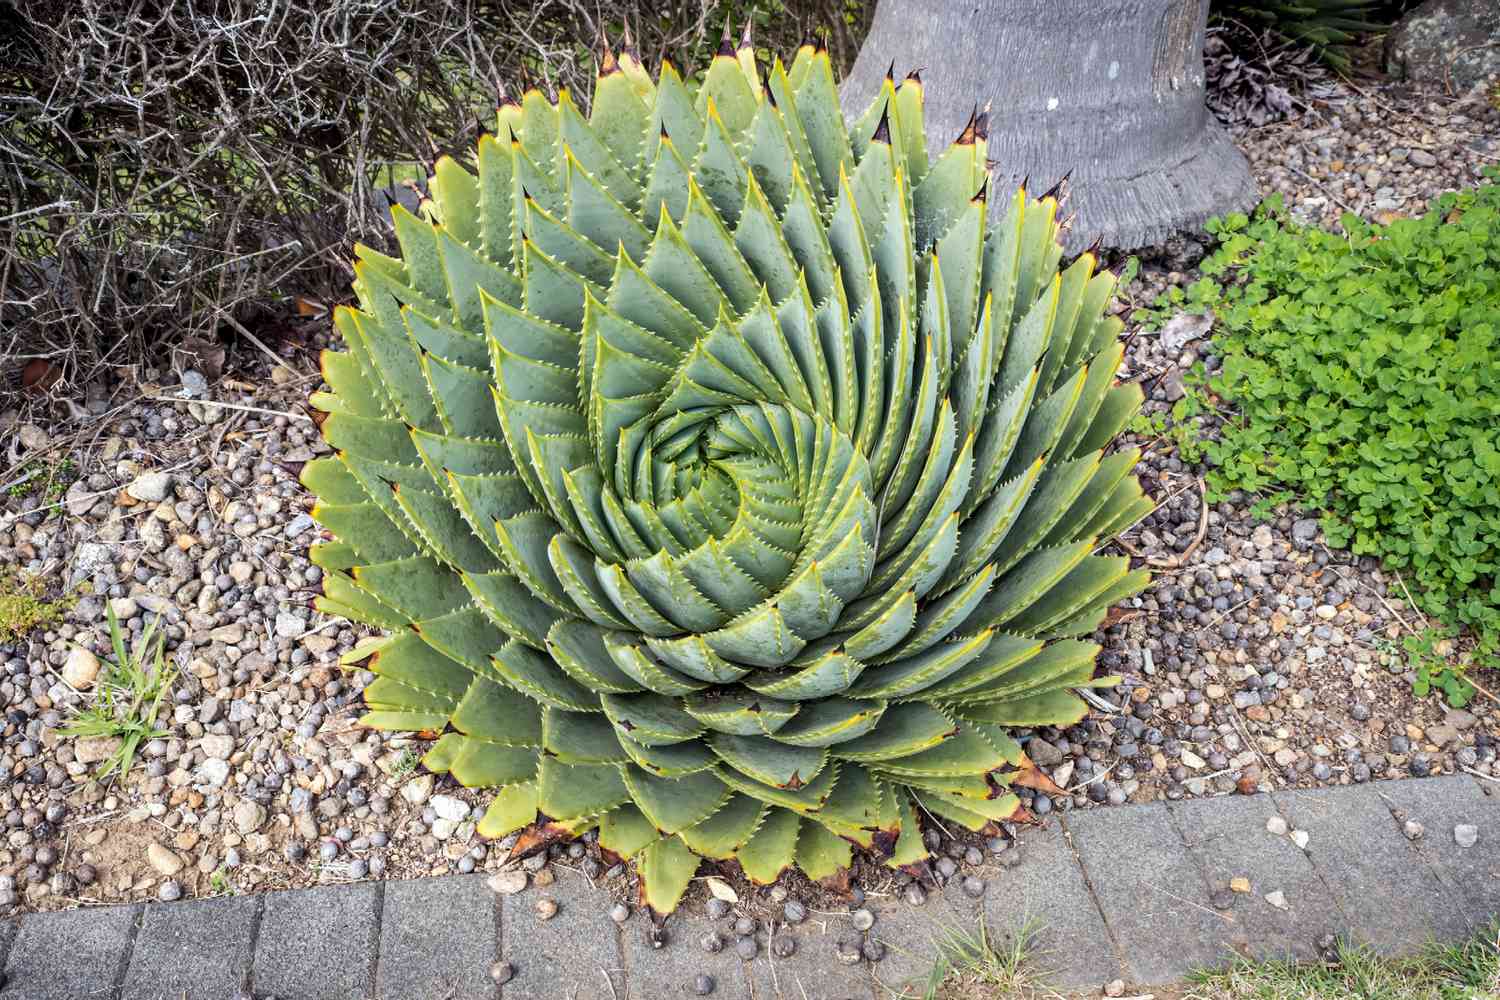 Spiral aloe vera succulent with thick triangular leaves spiraling inwards surrounded by gravel